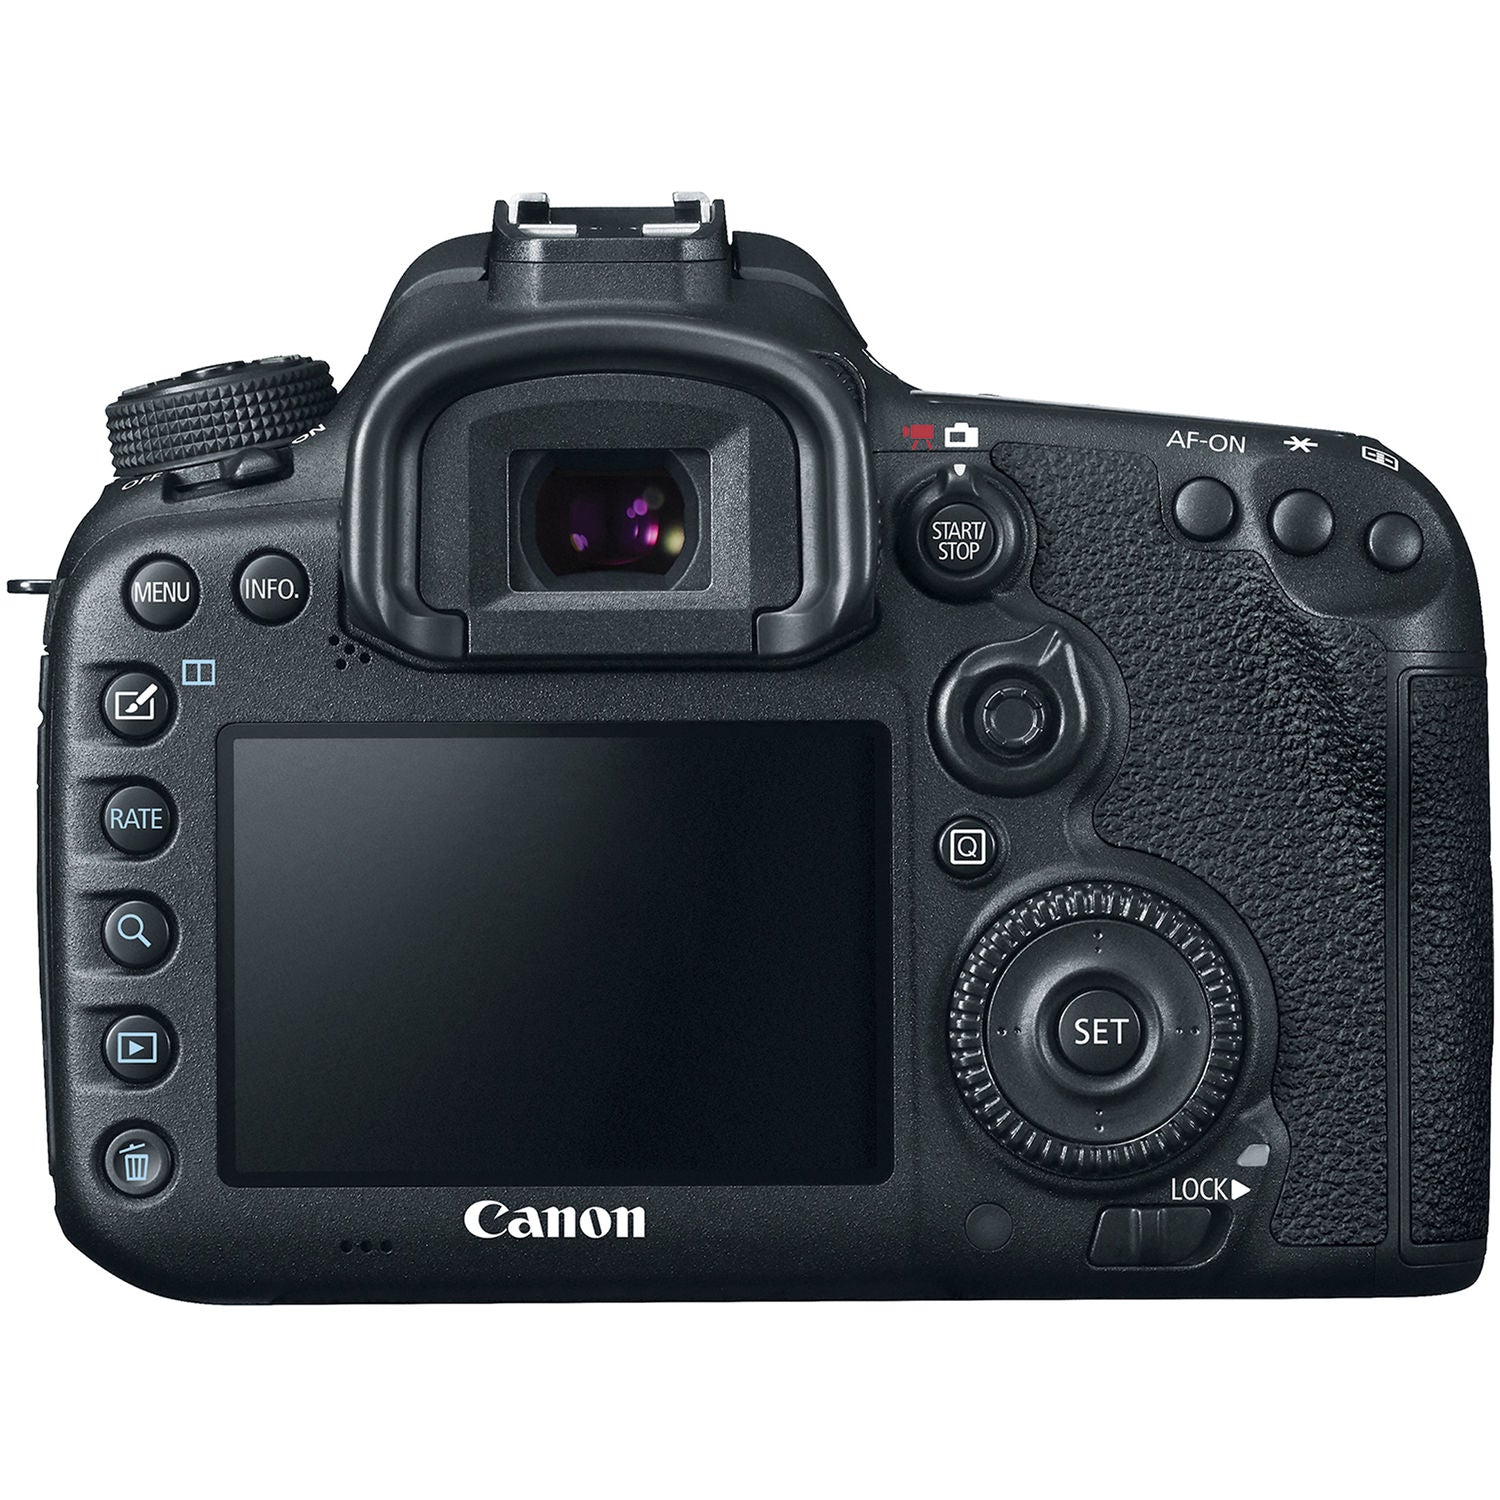 Canon EOS 7D Mark II DSLR Camera (Intl Model) with 18-135mm Lens & W-E1 Wi-Fi Adapter With Backpack